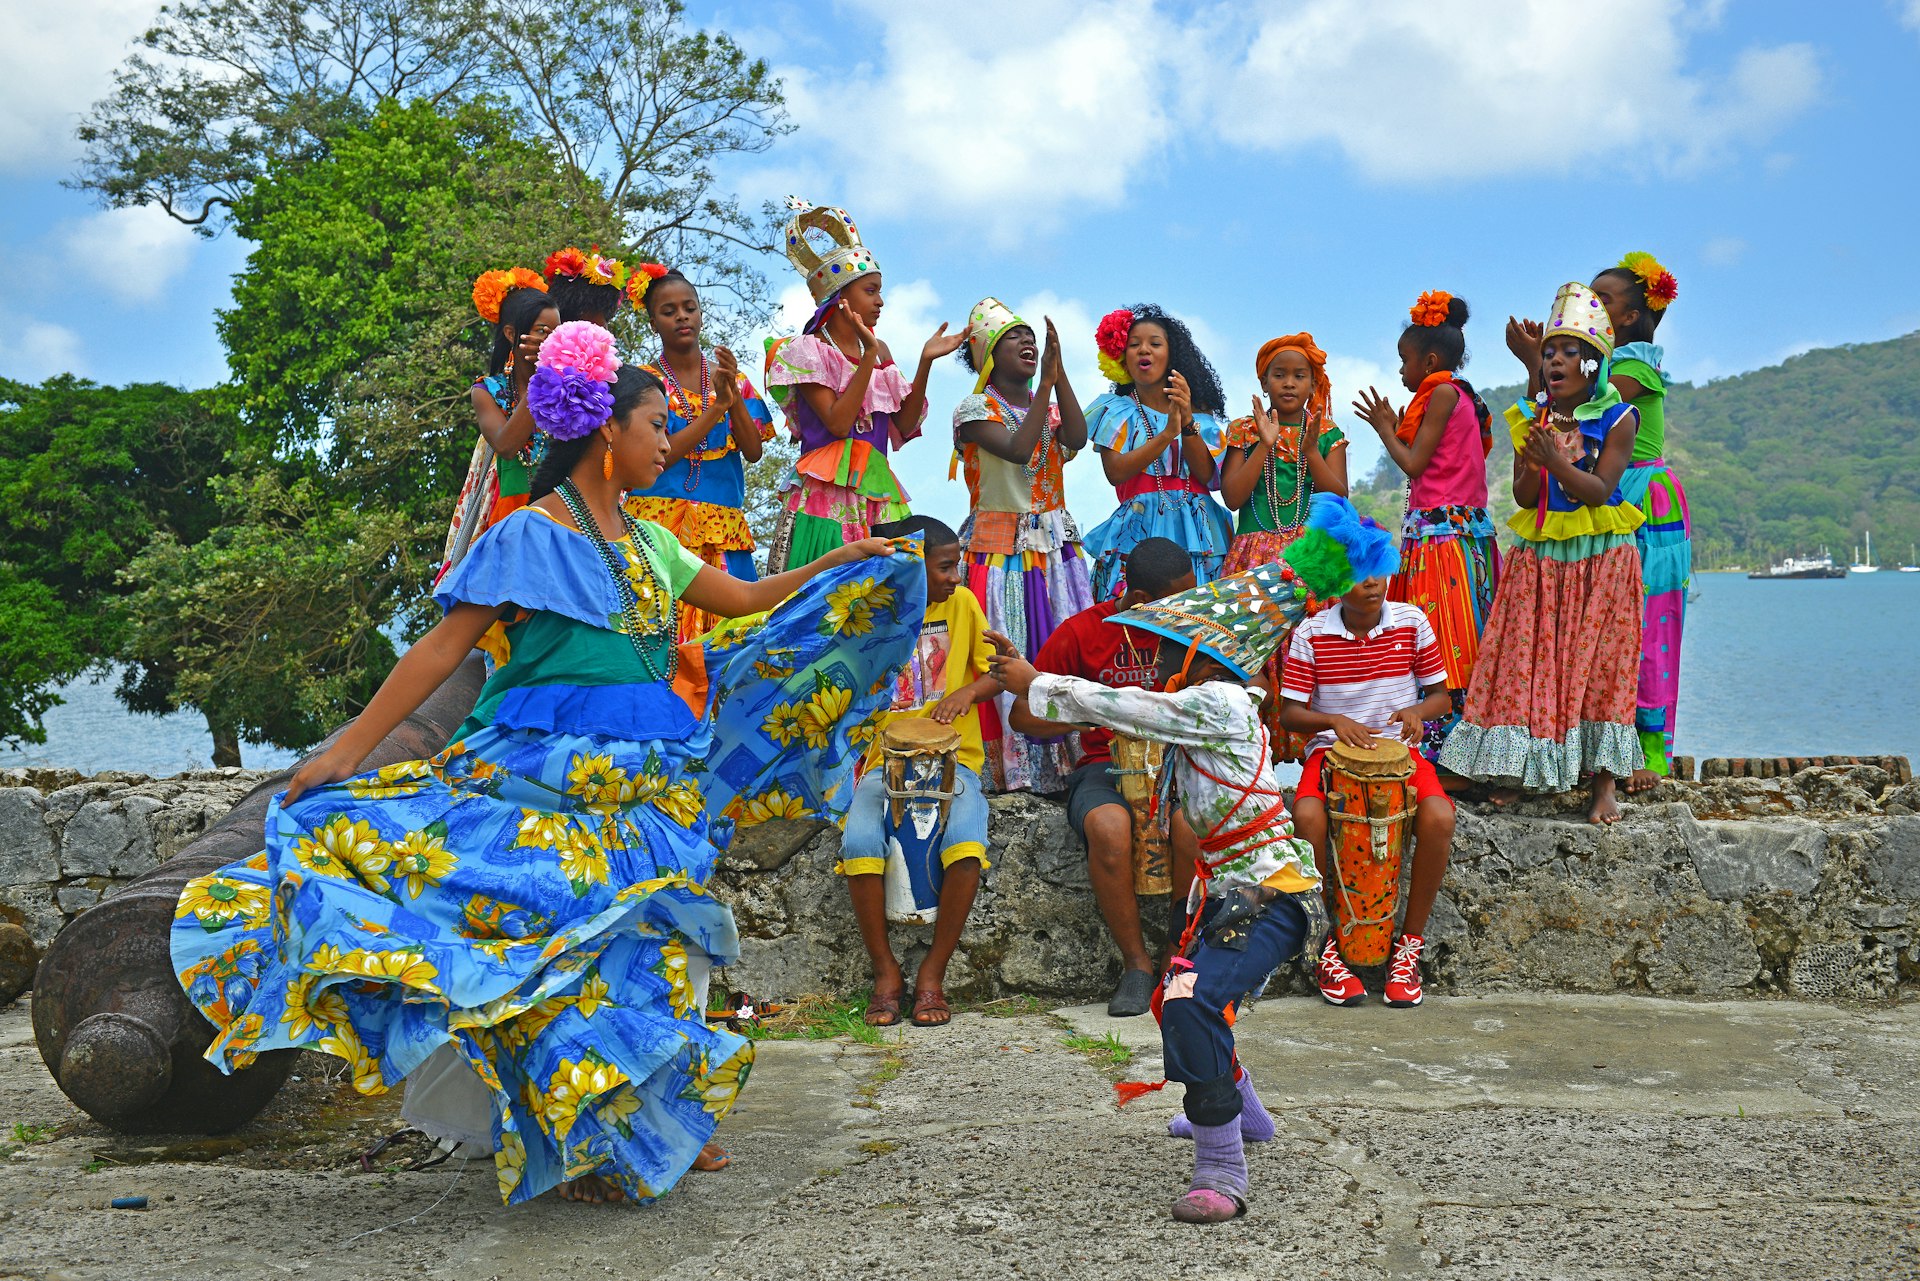 A group of young Panamenians performing the Congo dance in one of the Spanish fortresses (hence the cannons) of Portobelo by the Caribbean Sea, Panama, Central America